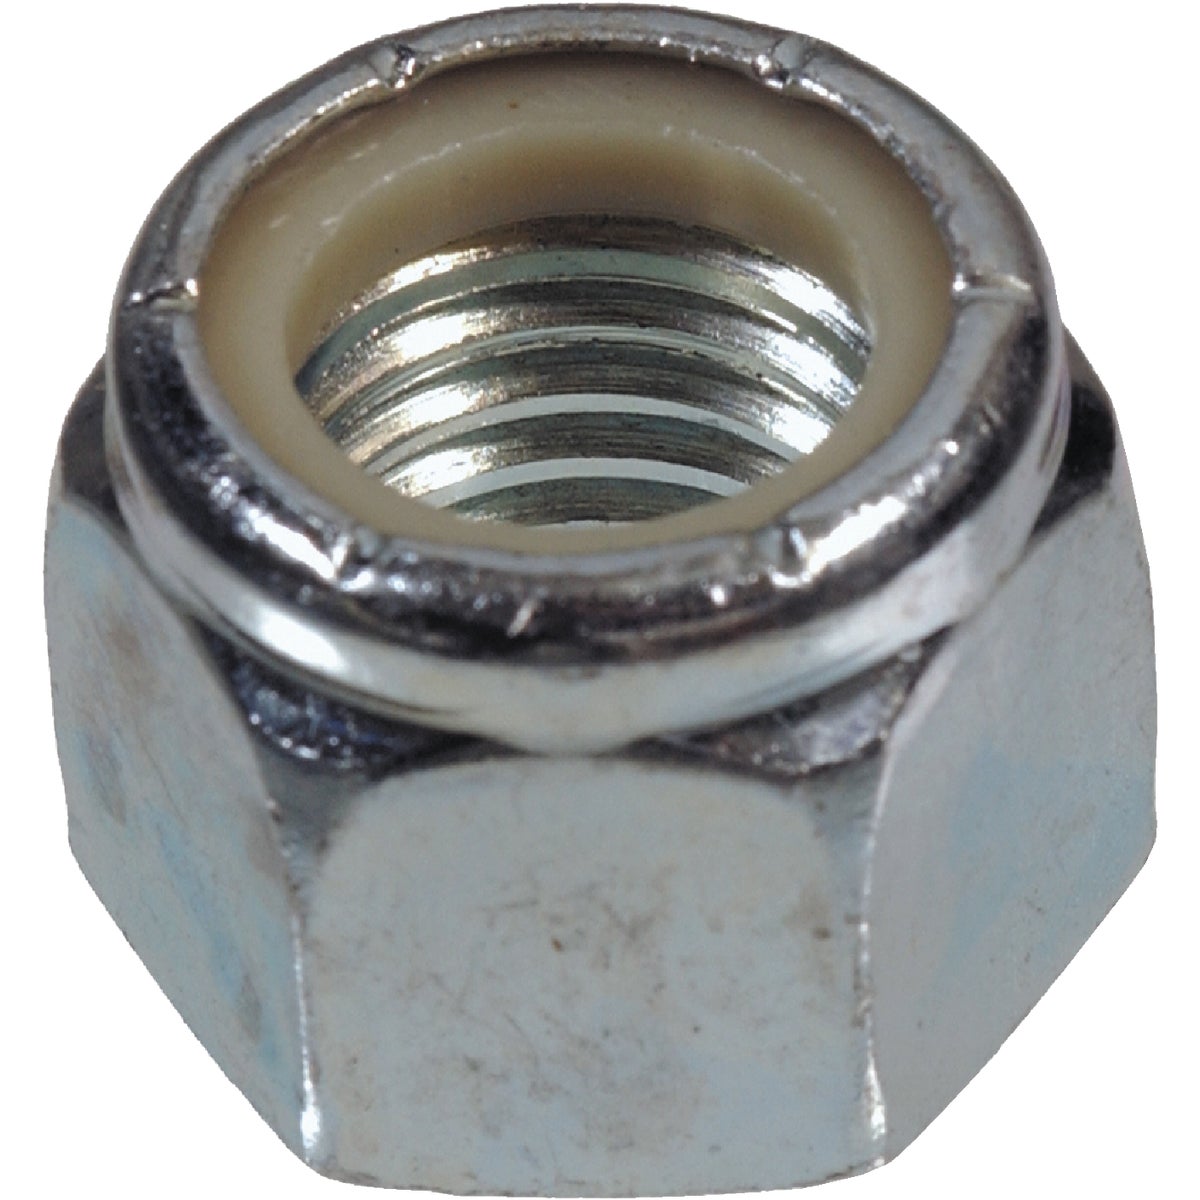 Item 732621, Zinc-Plated Nylon Insert Stop Nuts are ideal for securely fastening a bolt 